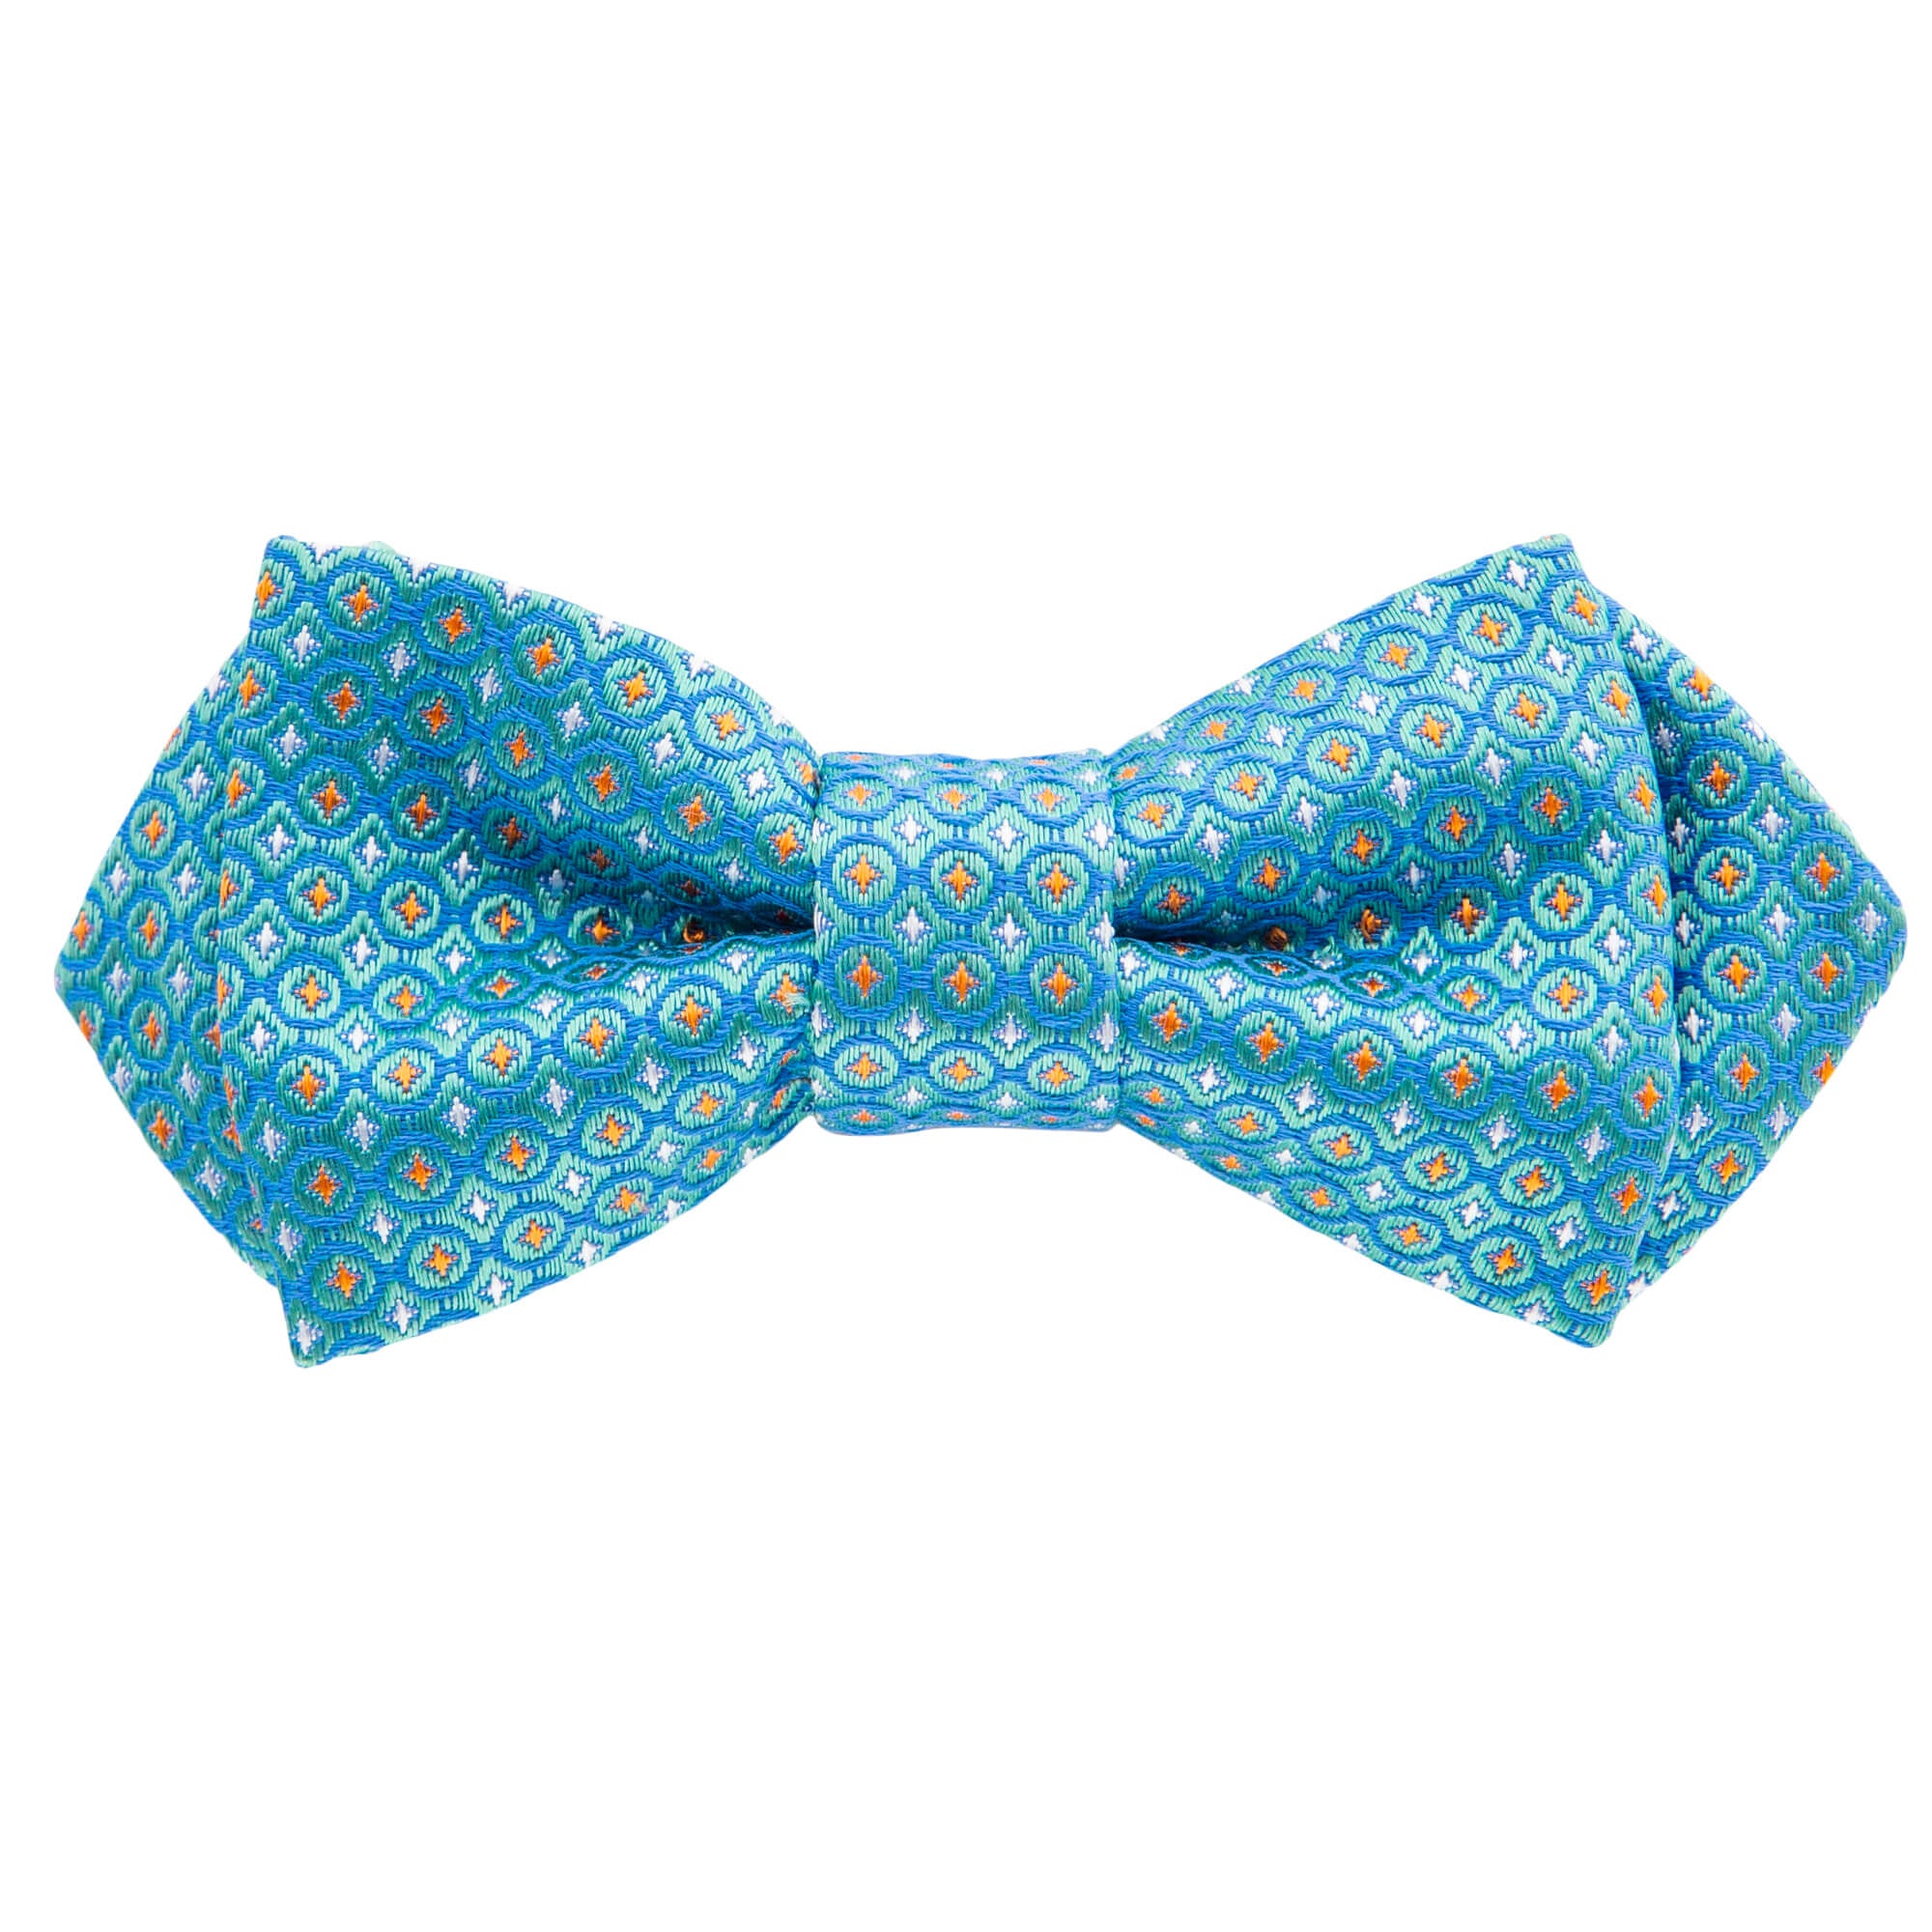 Mint with Circles and Diamonds Bow Tie